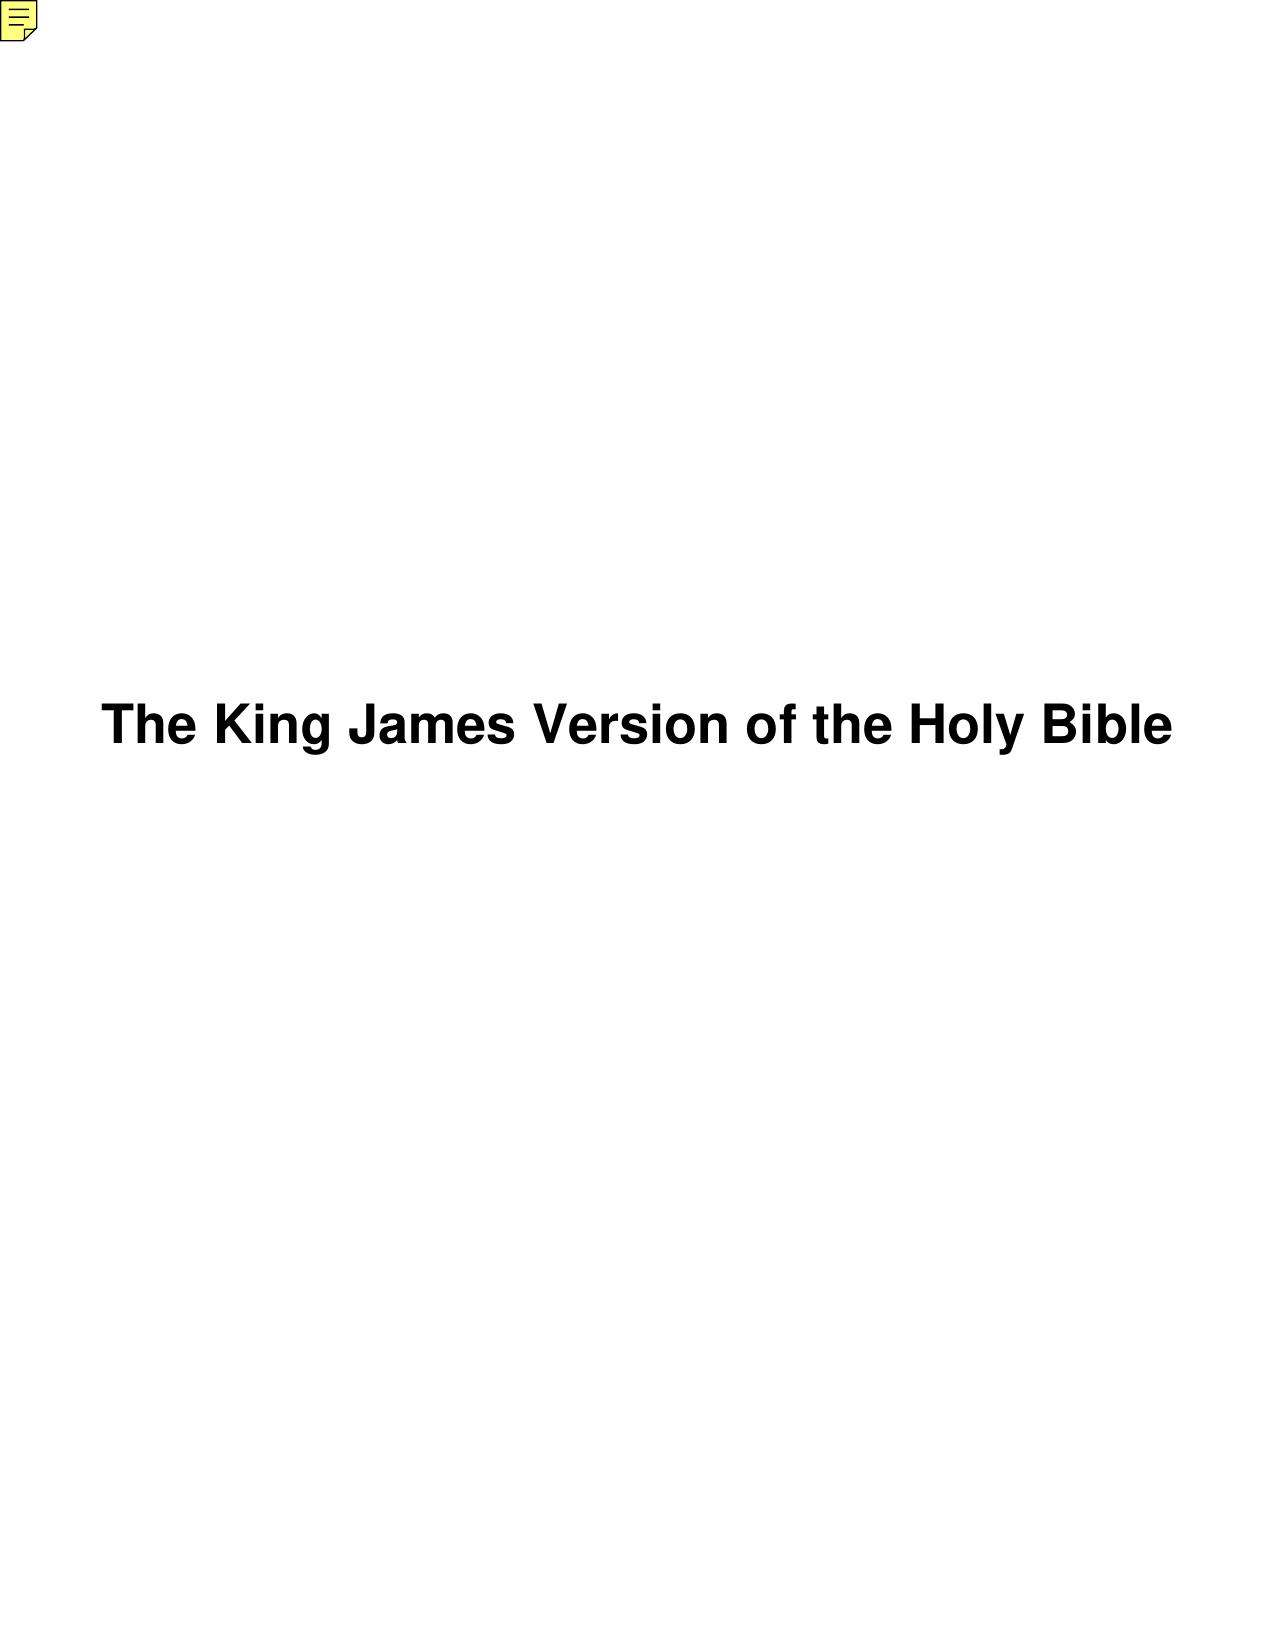 The King James Version of the Holy Bible by God